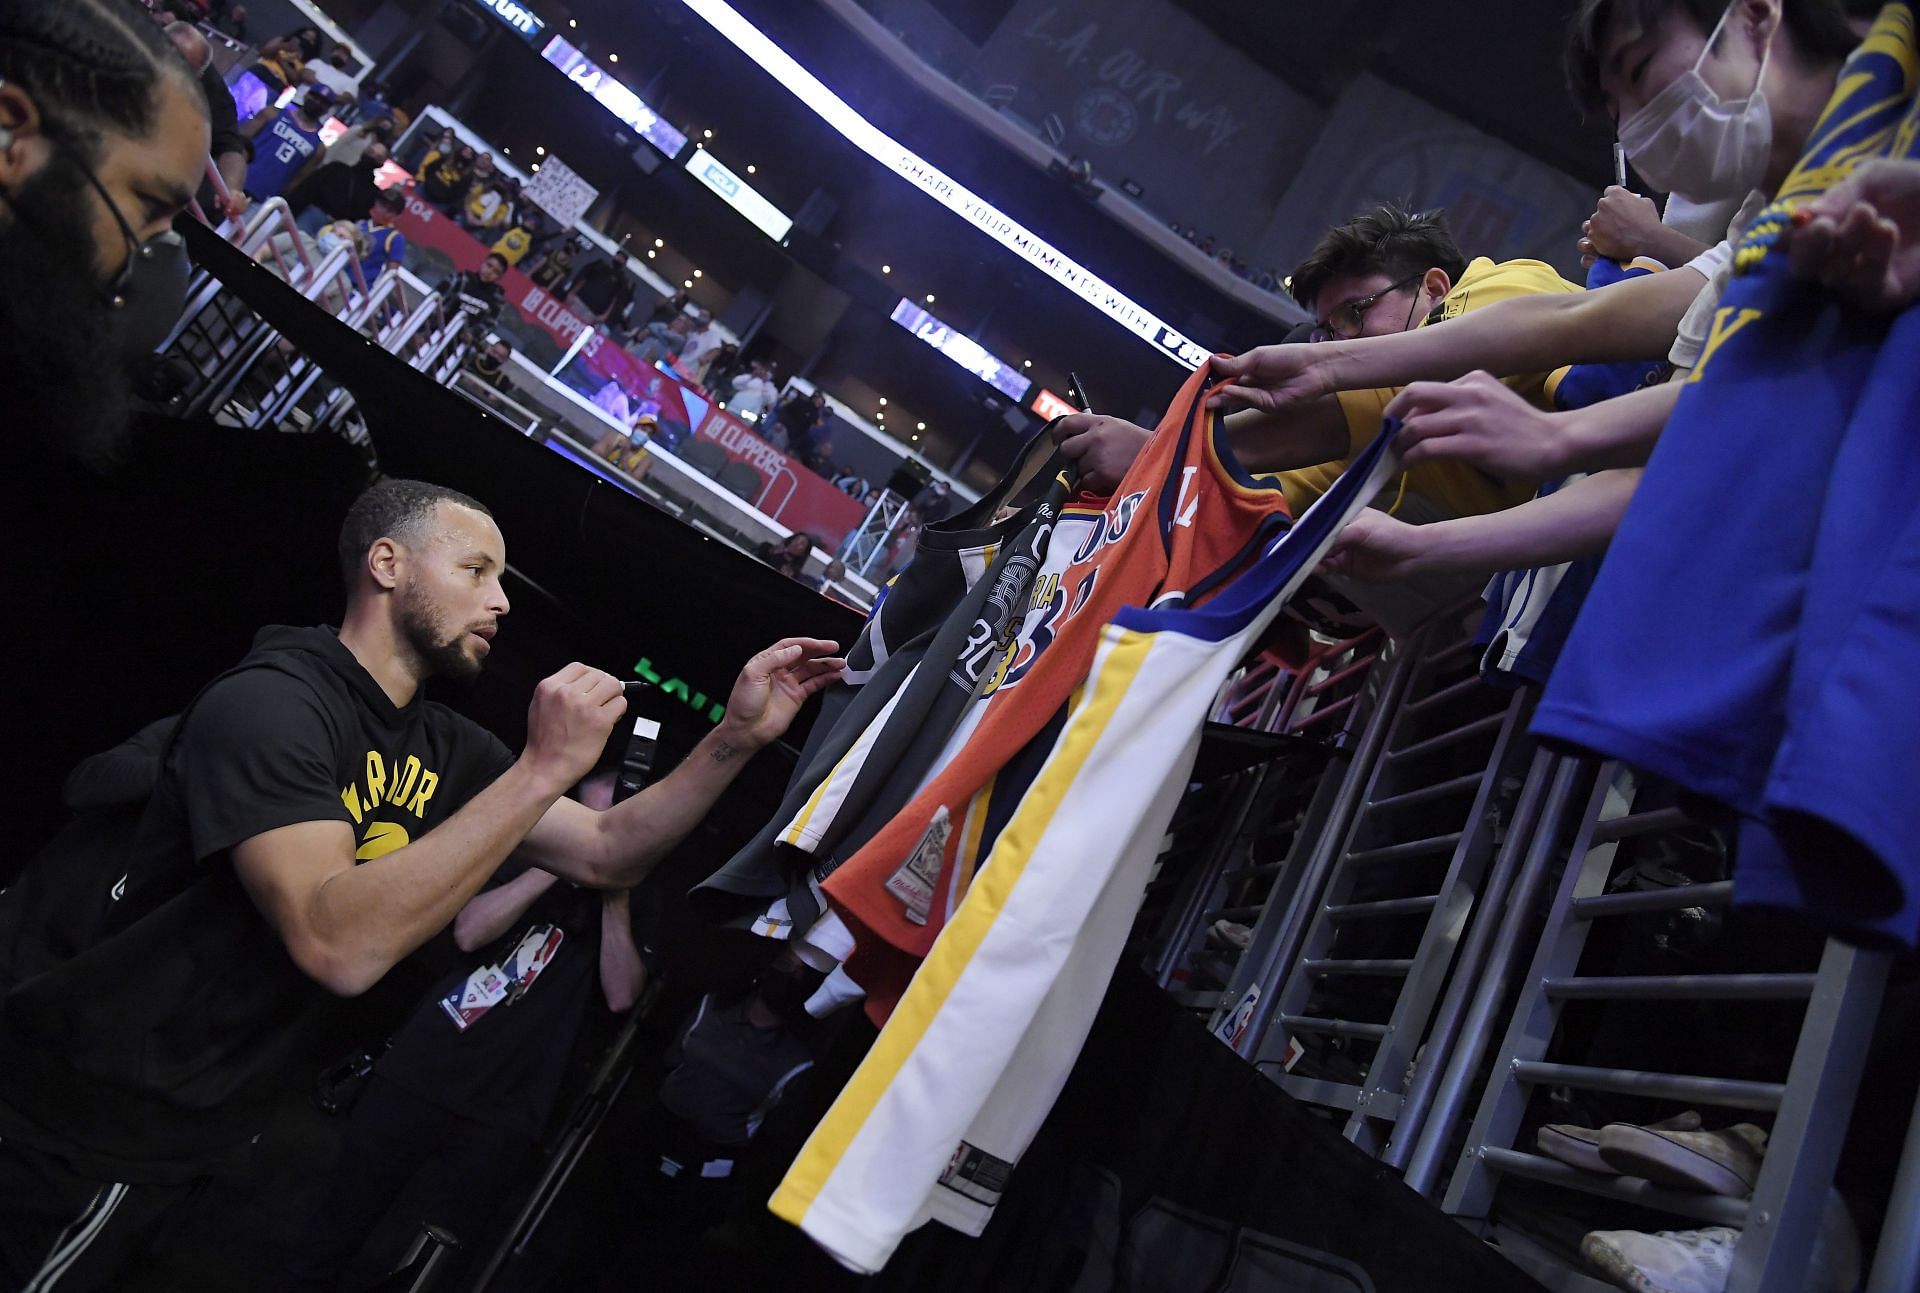 Stephen Curry of the Golden State Warriors signs jerseys at the Staples Center.